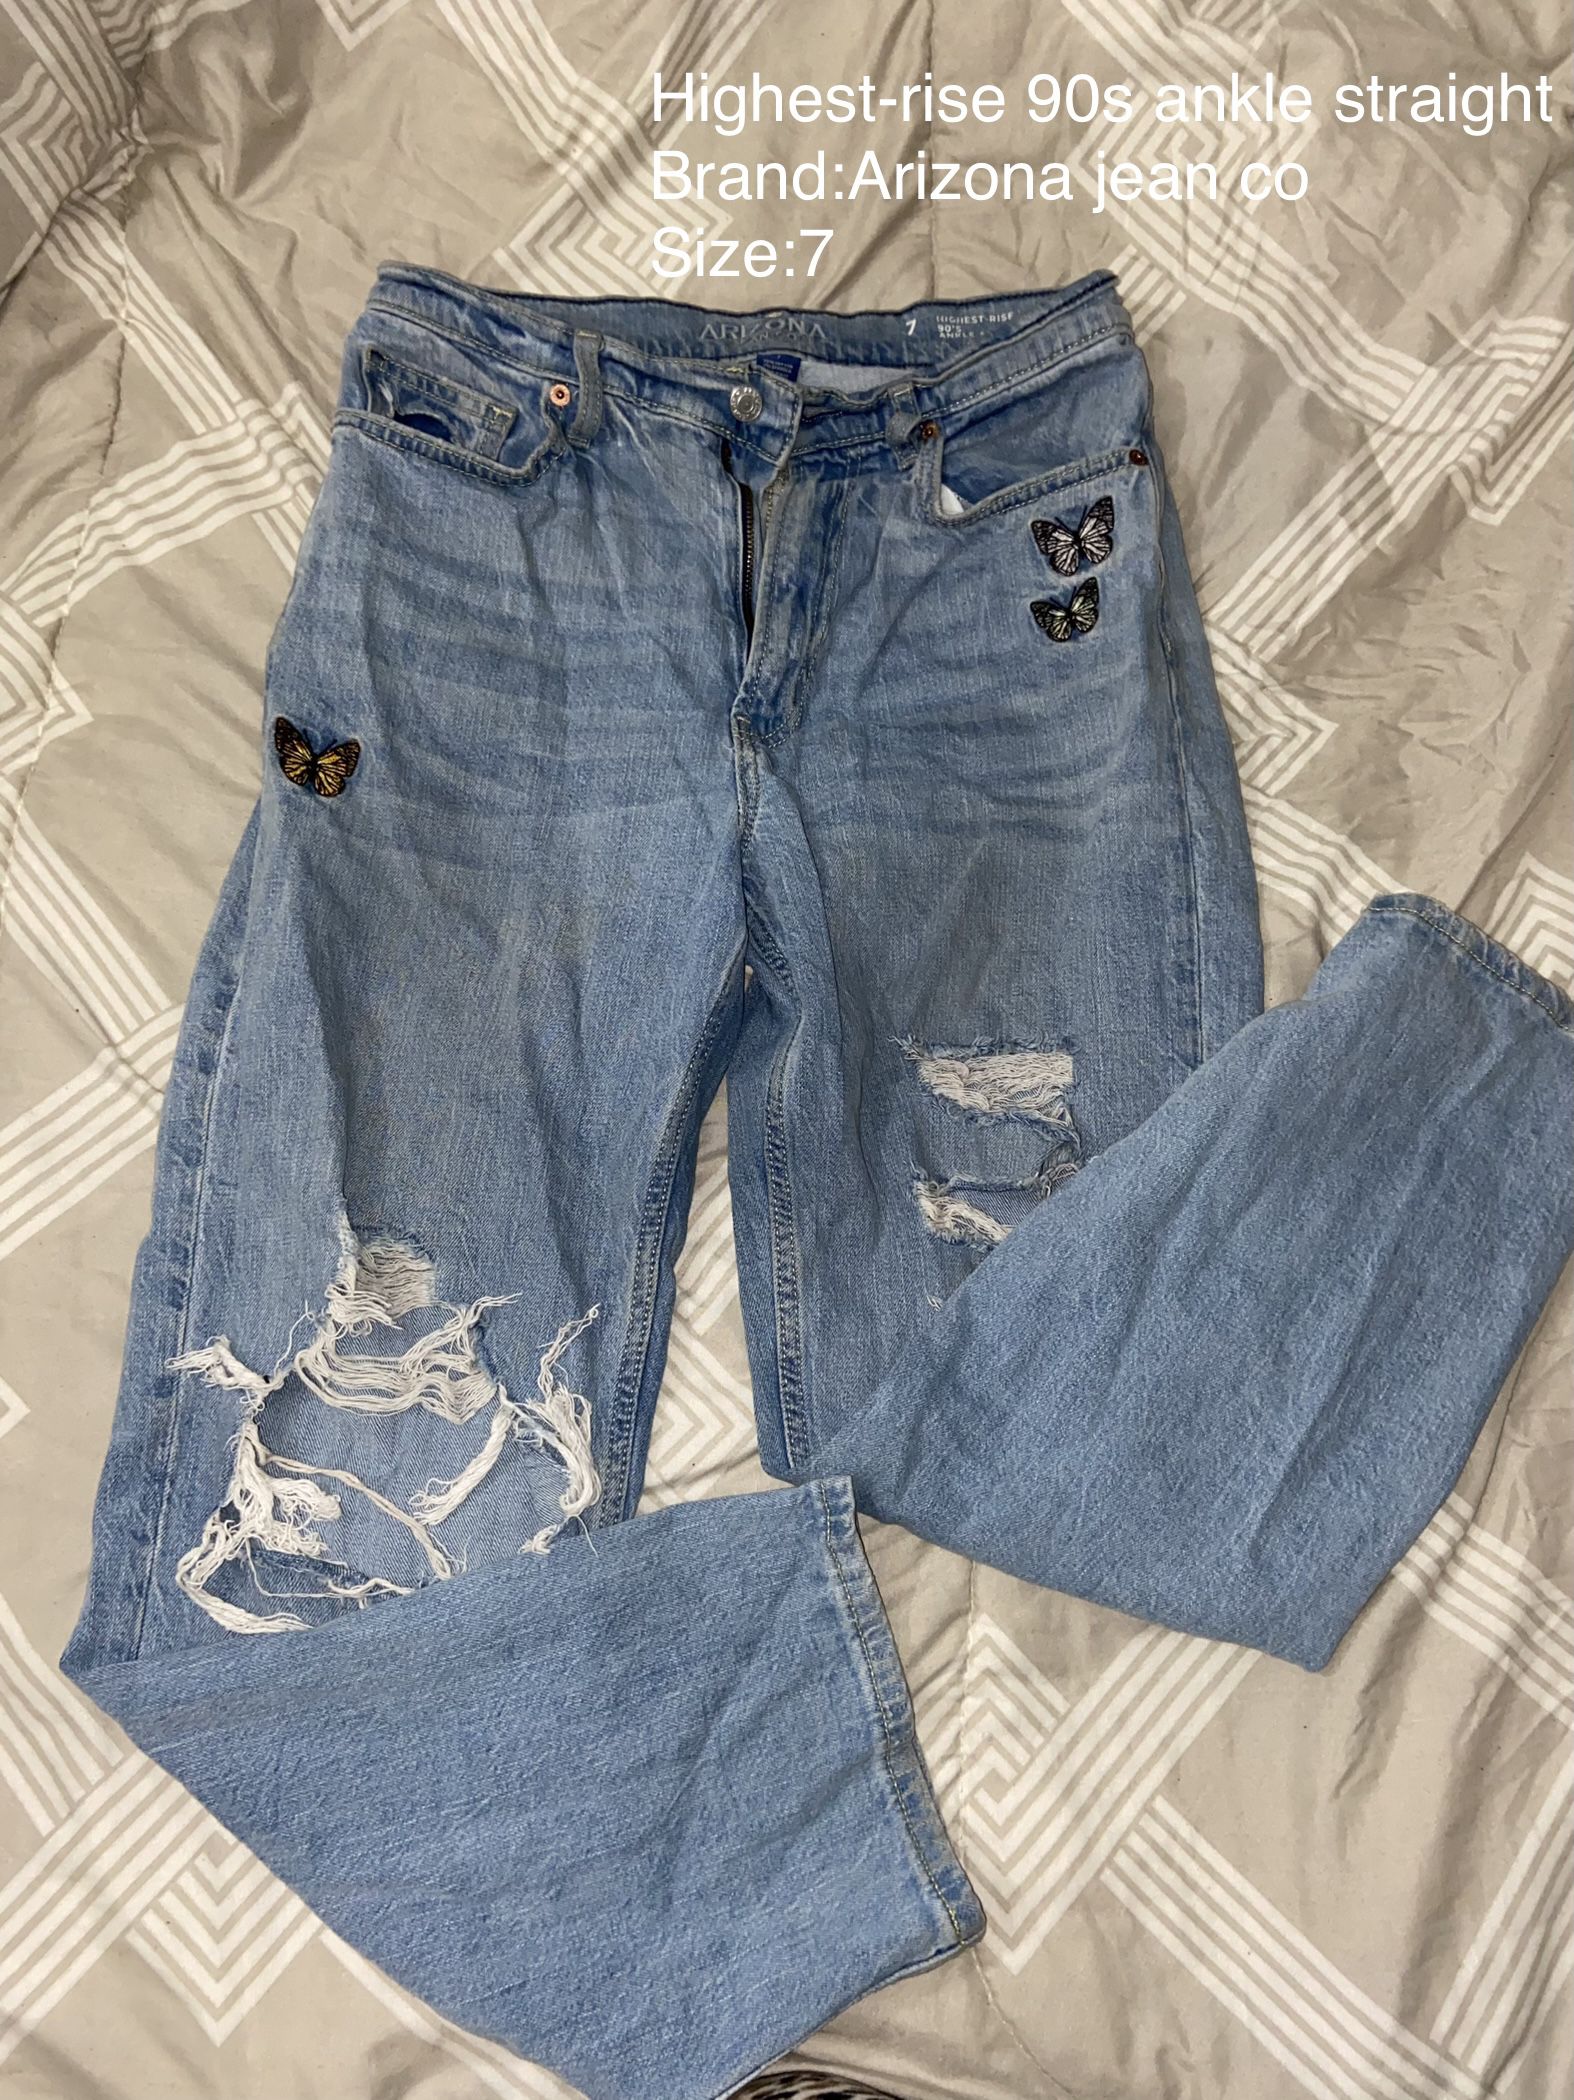 Highest Rise Jeans 